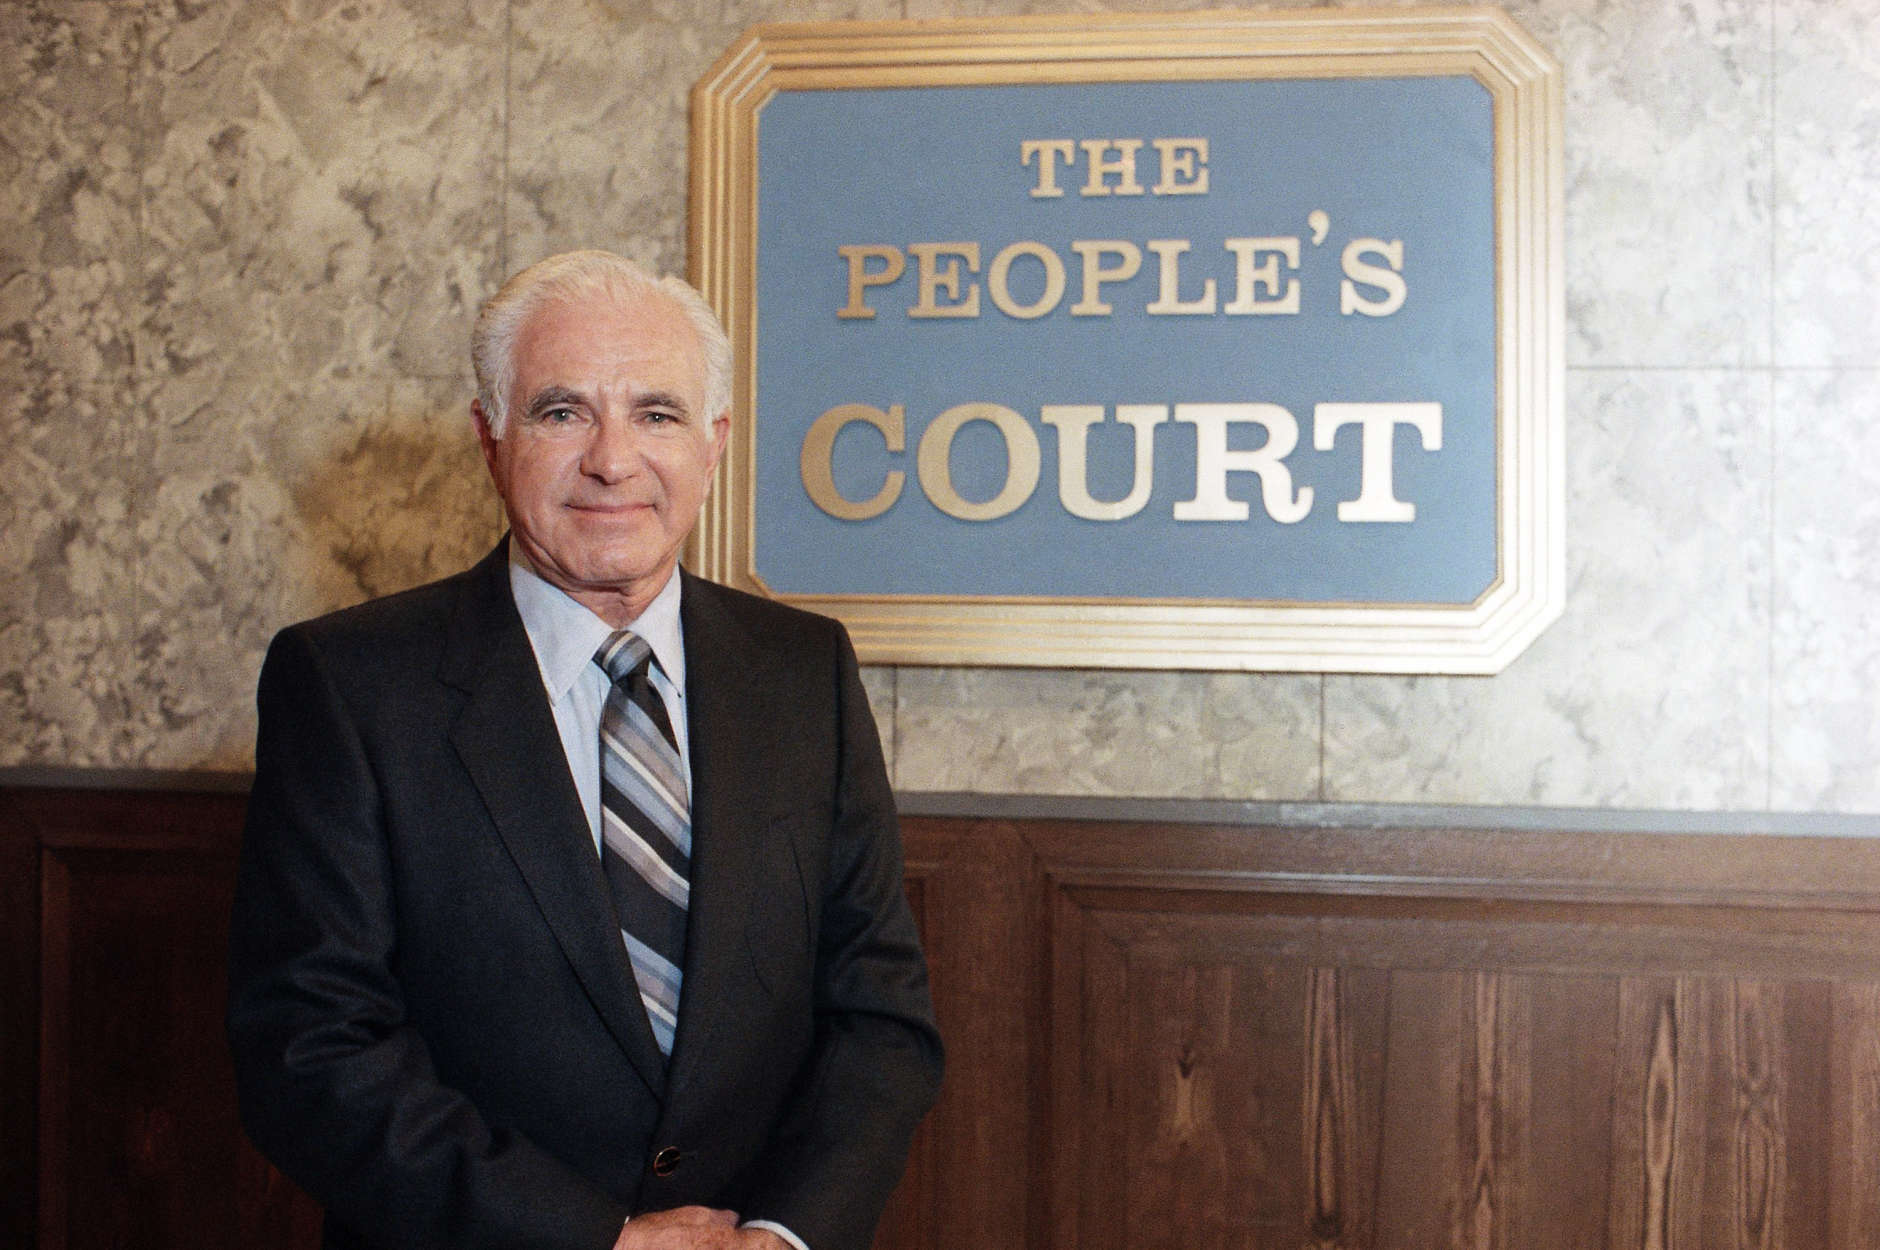 Joseph Wapner, star of television show "People's Court" on Oct. 22, 1986. A family member says Joseph Wapner, who presided over “The People’s Court” with steady force during the heyday of the reality courtroom show, died Feb. 26, 2017. He was 97.  (AP Photo/Galbraith)